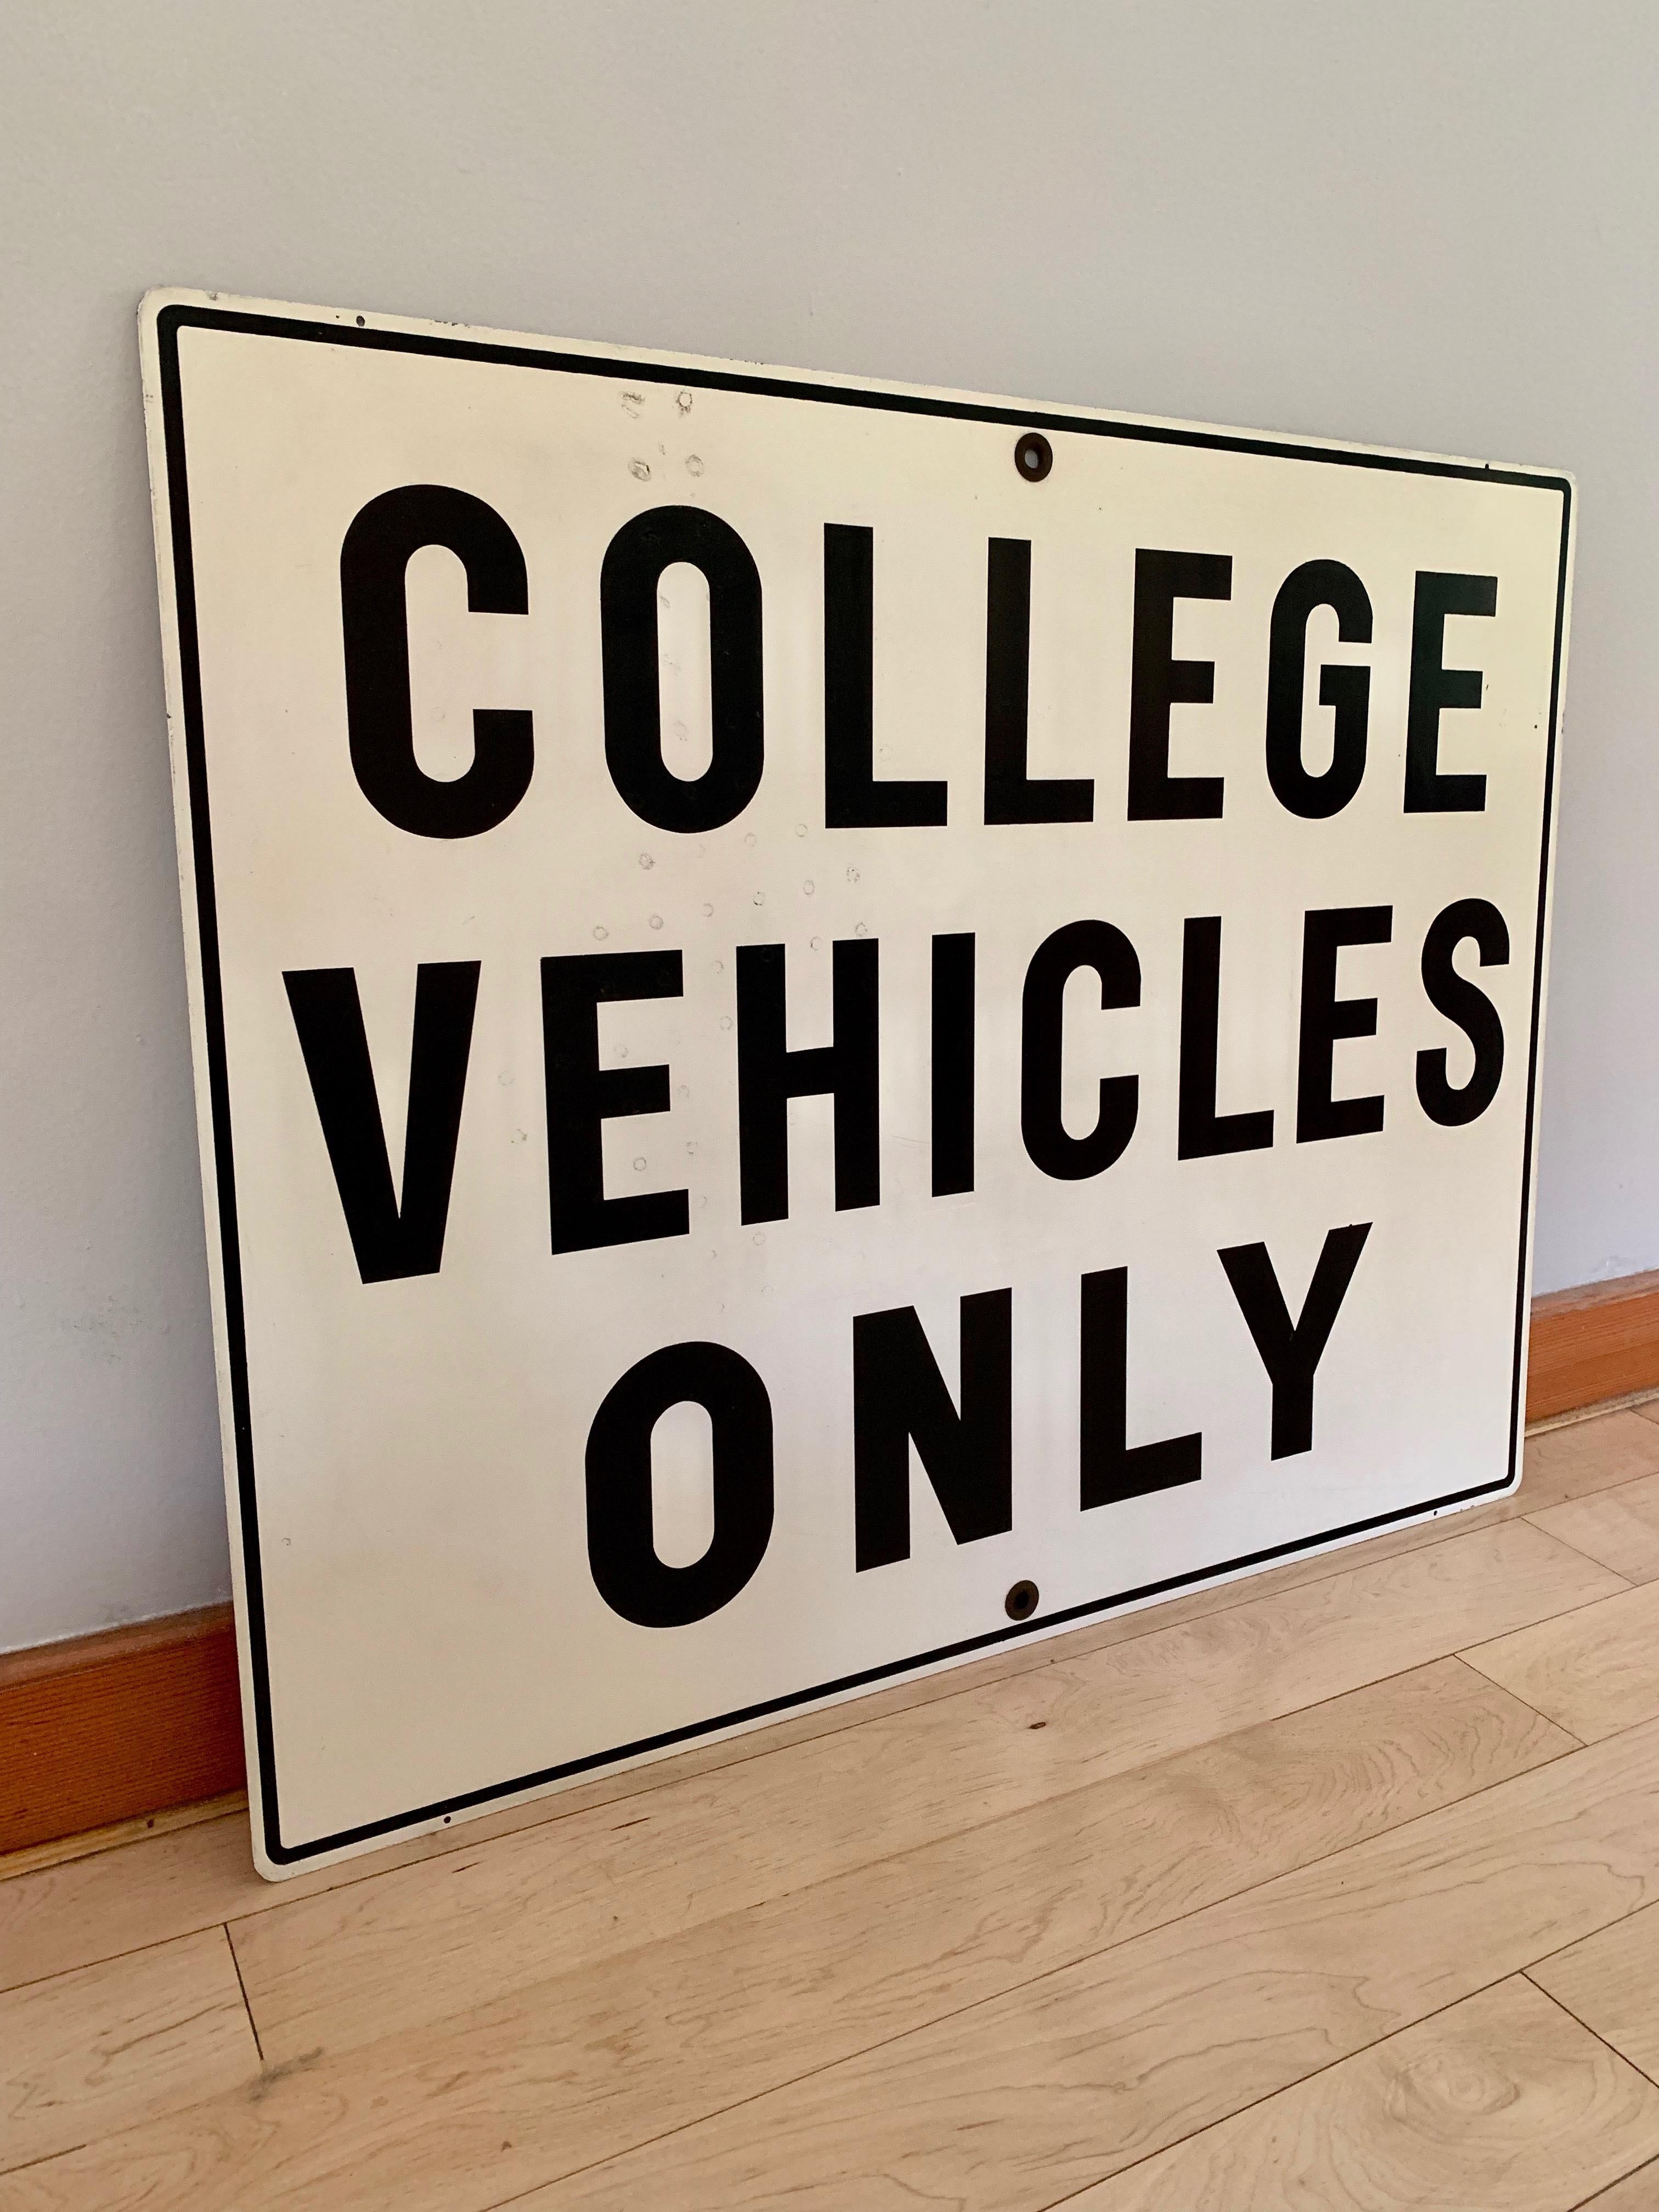 Rare vintage steel road sign from California. White sign with black lettering 